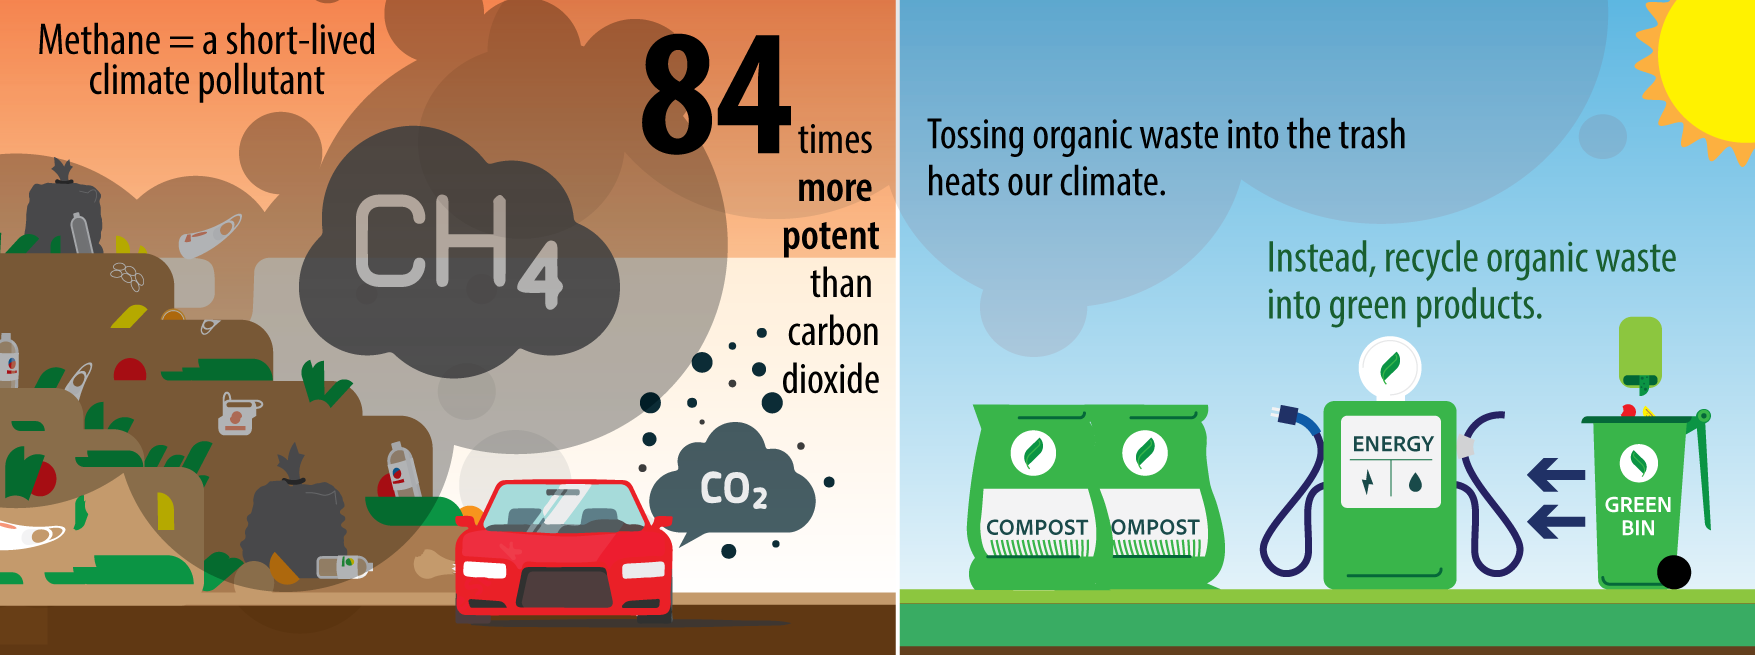 Methane is 84 times more potent than carbon dioxide. Tossing food scraps and yard waste into the trash heats our climate. Instead, recycle food scraps and yard waste into green products.